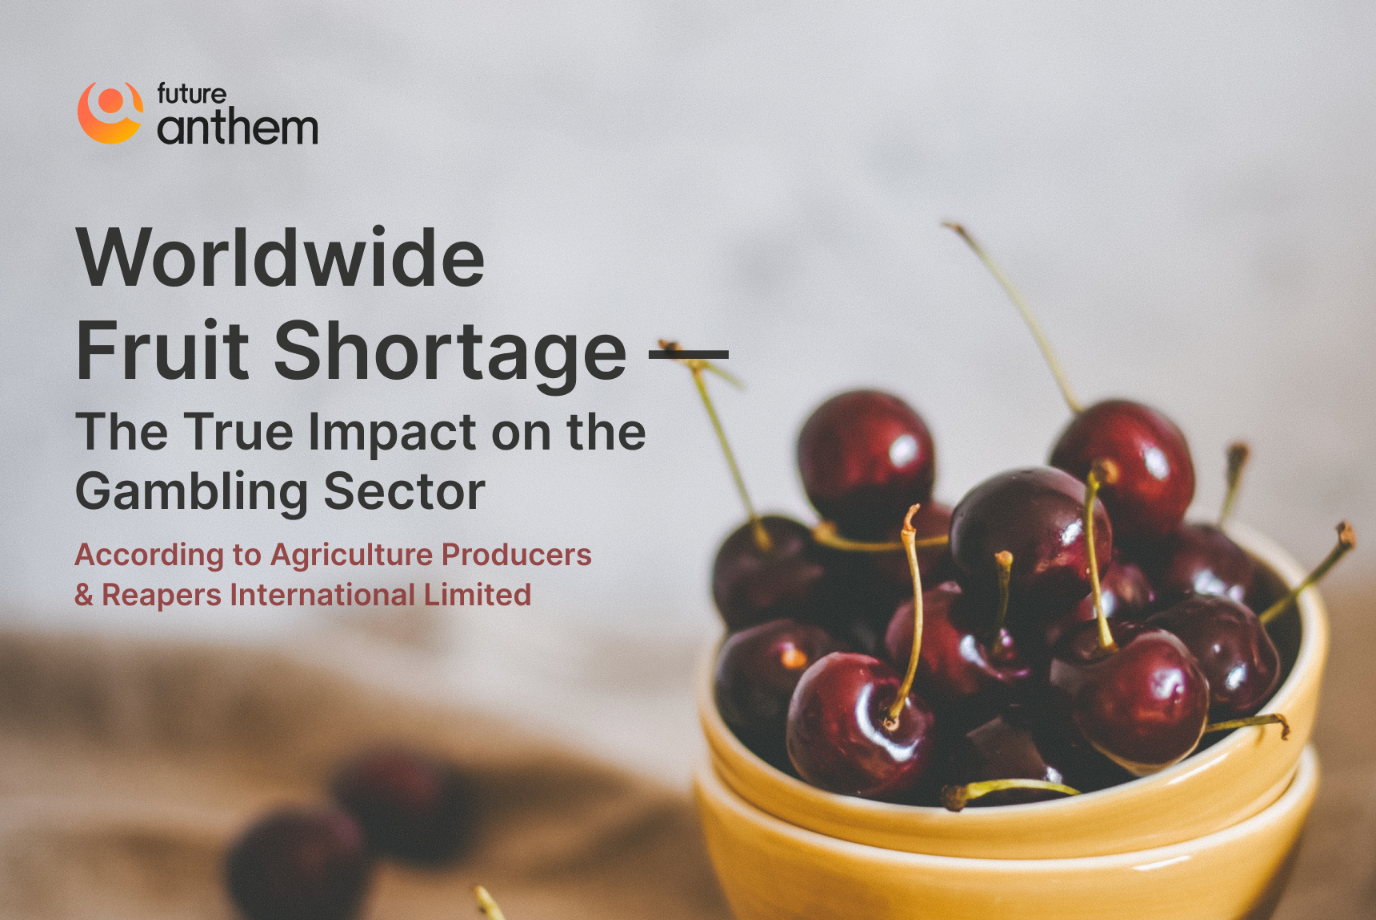 The Worldwide Fruit Shortage & the impact on the Gambling sector